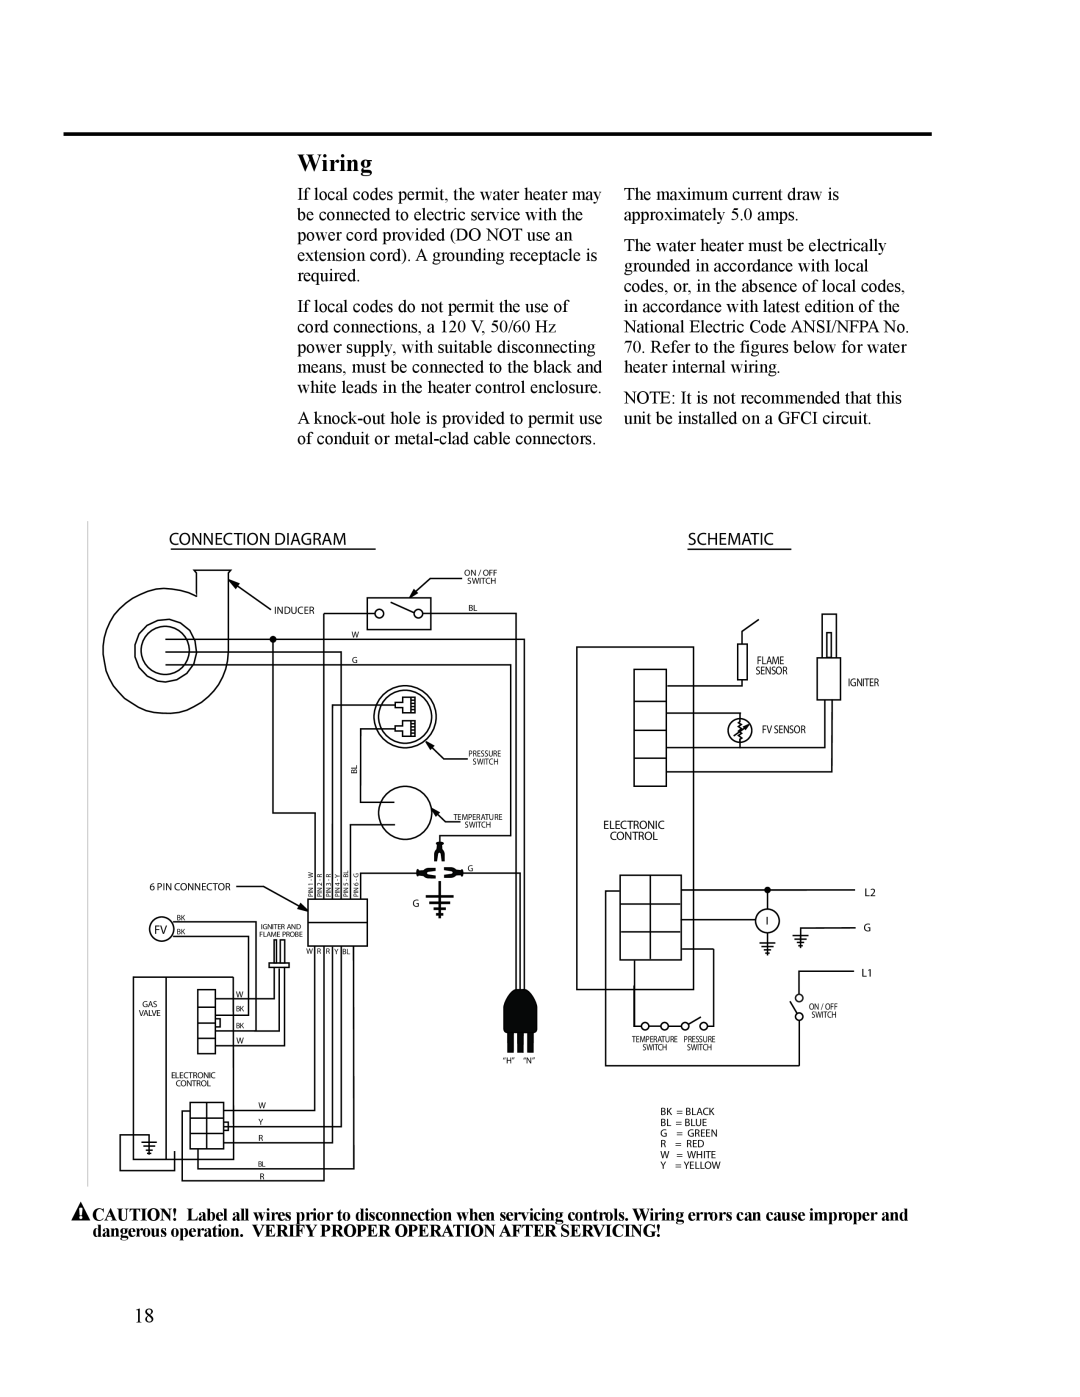 Ruud AP14236 installation instructions Wiring, Connection Diagram, Schematic 